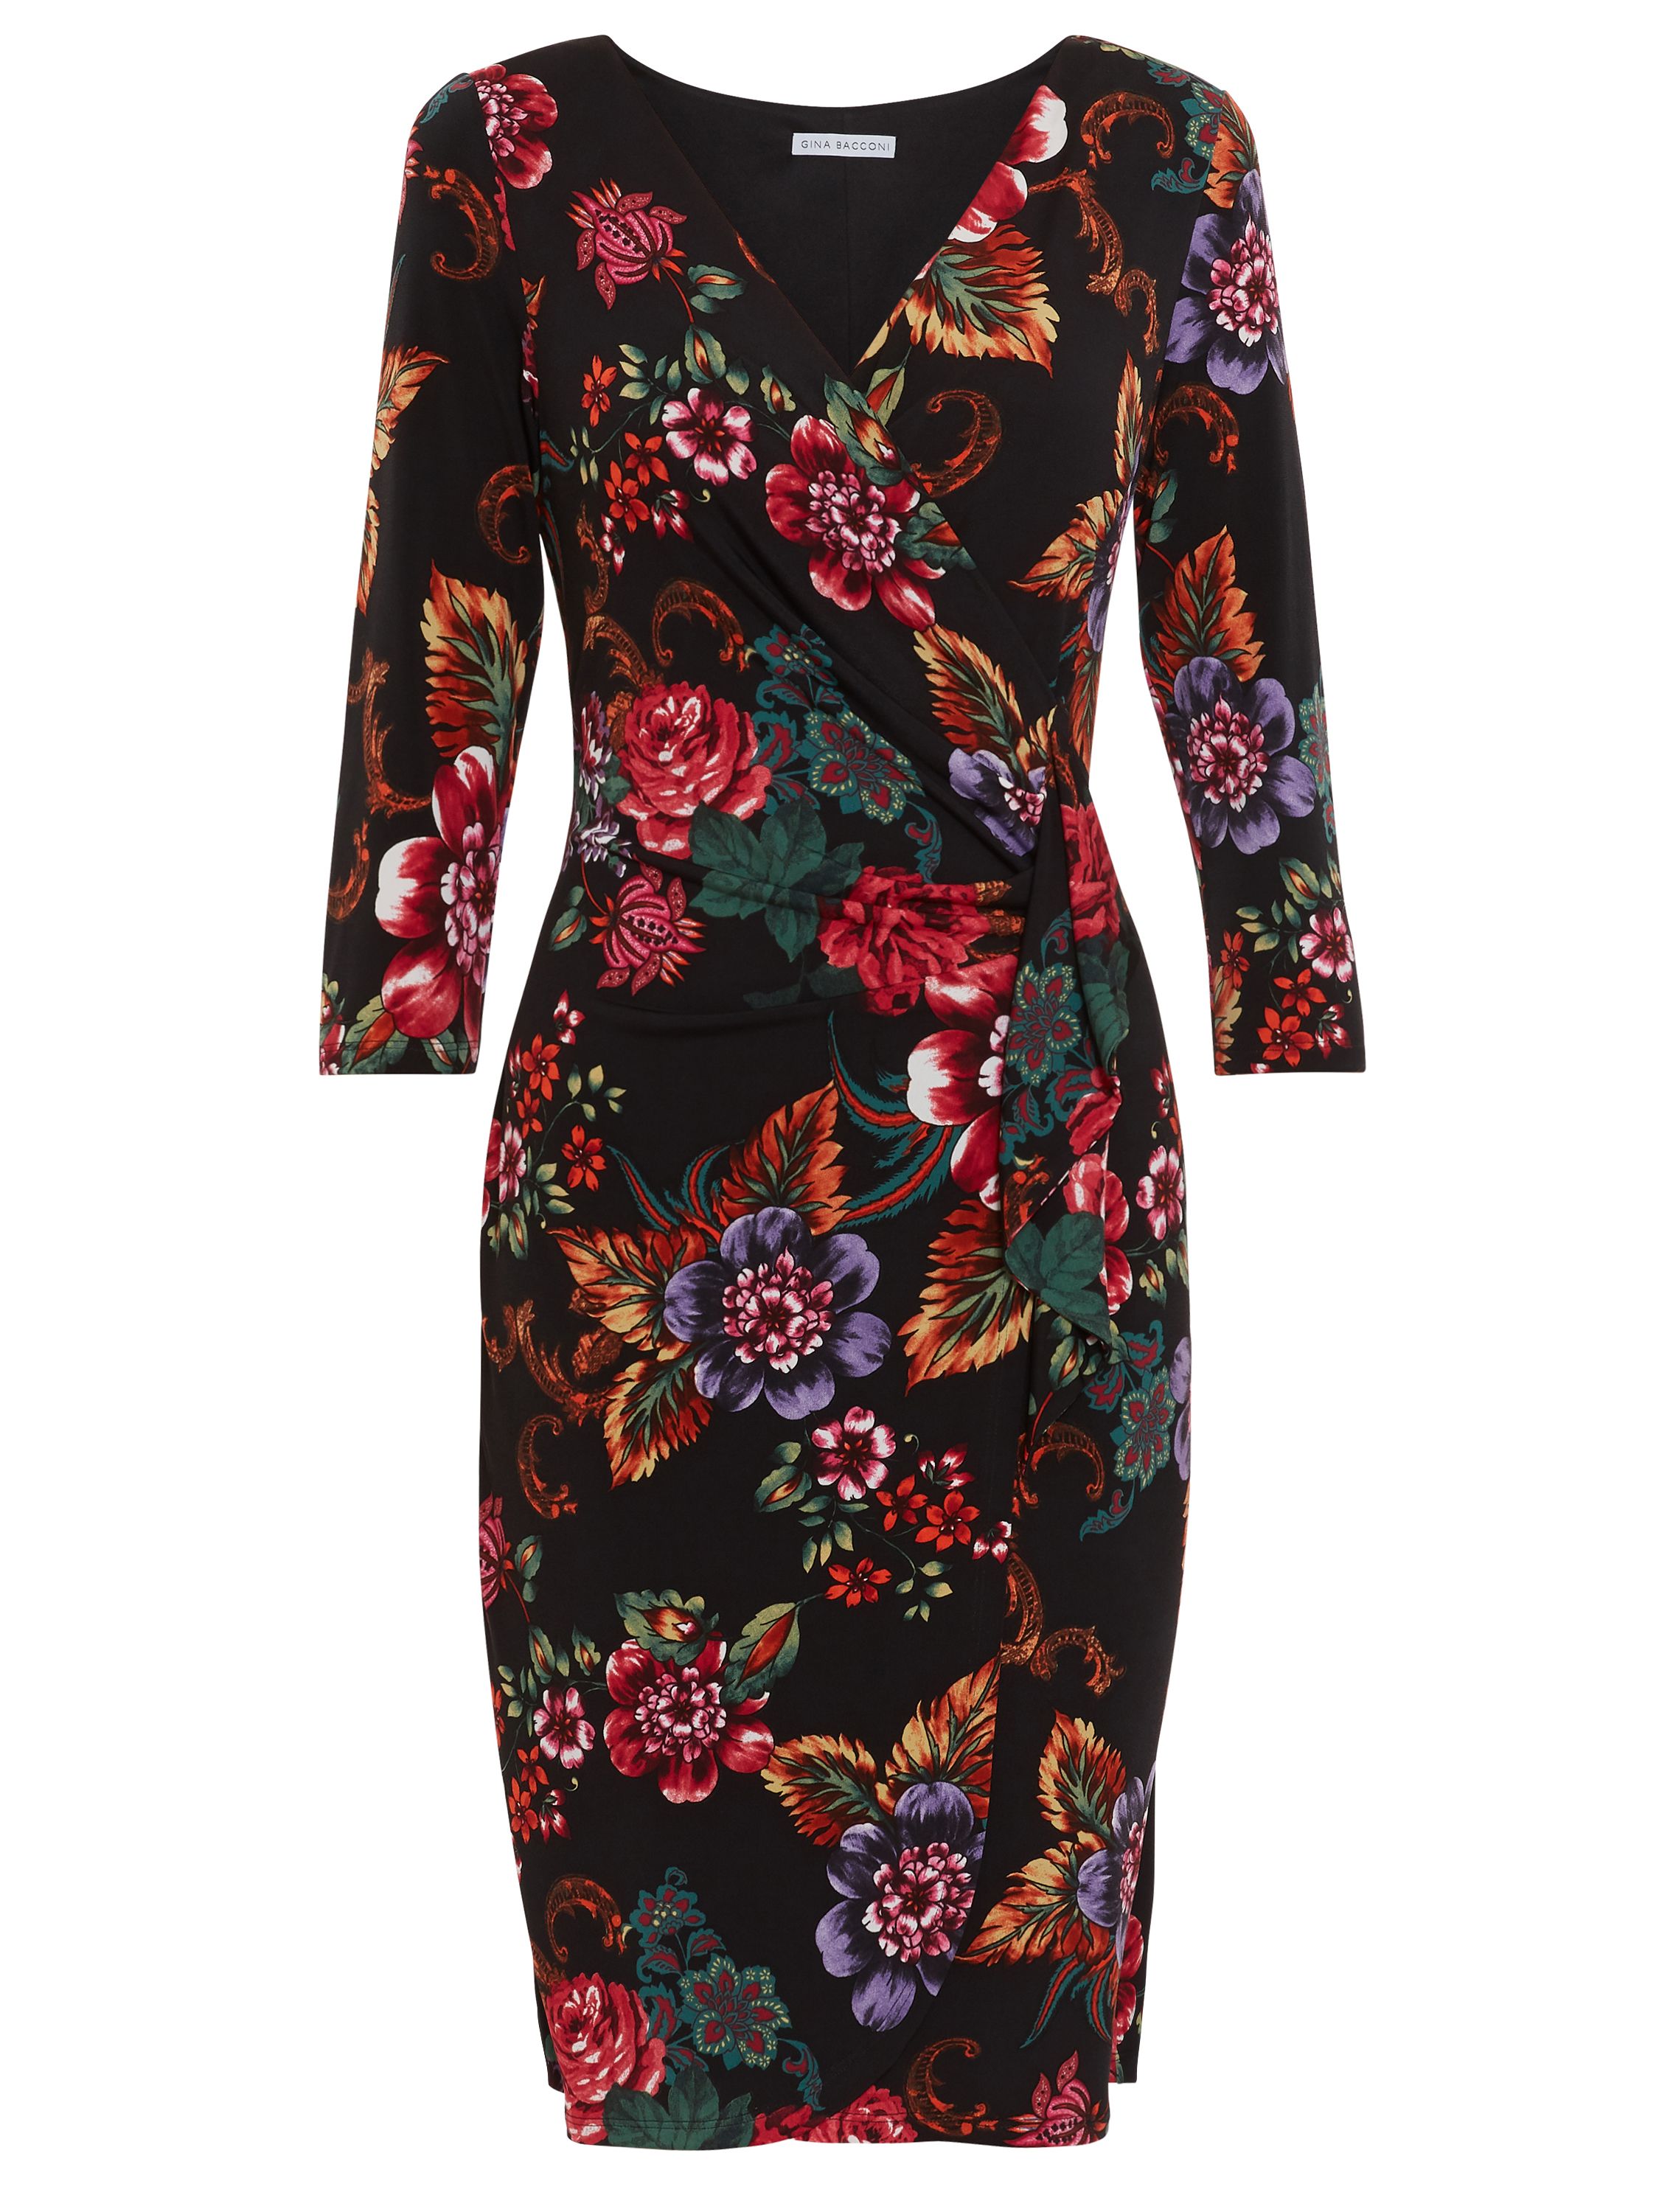 This Gina Bacconi dress will make a fabulous addition to your wardrobe. Perfect as a daywear or evening option, the dress is fashioned from a lovely floral print jersey making it effortless to wear. The dress features a wrap style bodice with an elegant ruffle feature for added class and draping to side giving you perfect silhouette. Fully lined for comfort.